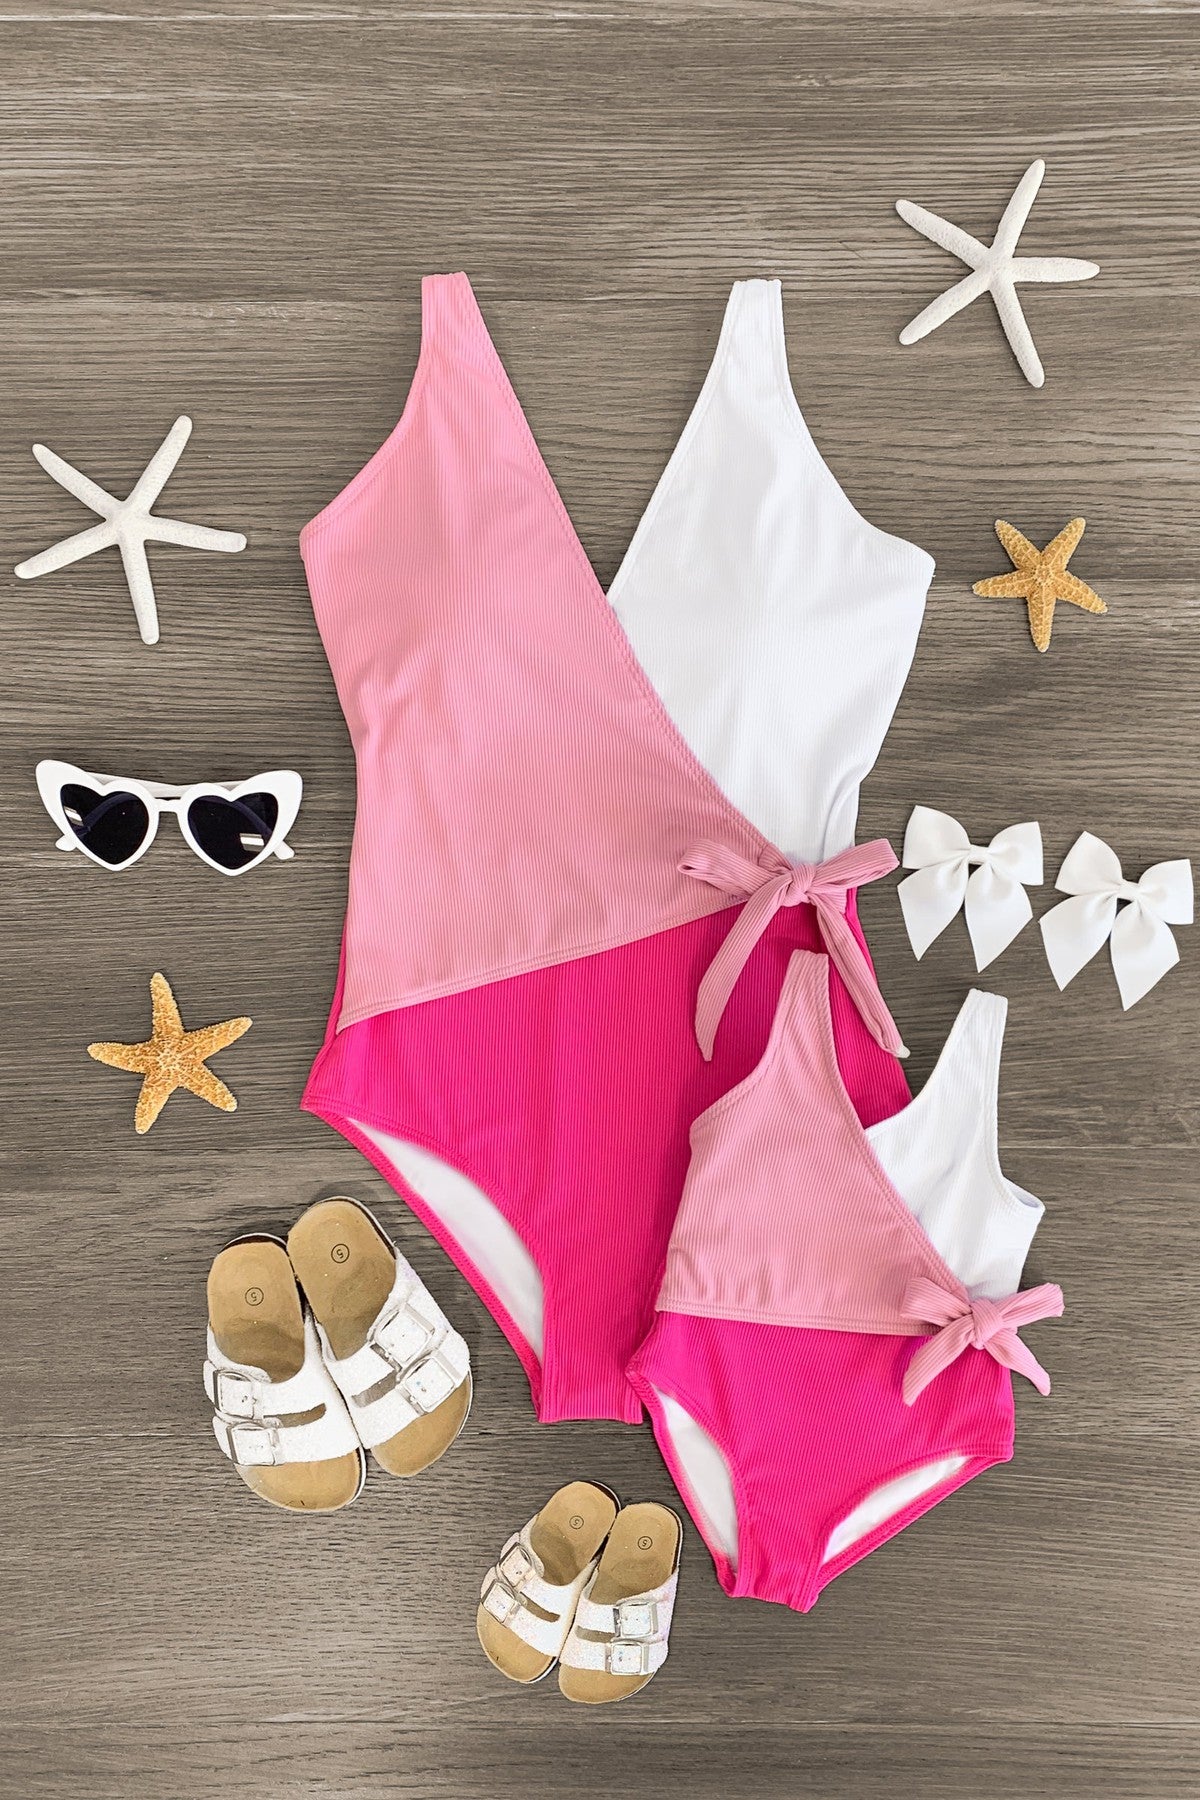 Mom & Me - Pink & White One Piece Swimsuit - Sparkle in Pink